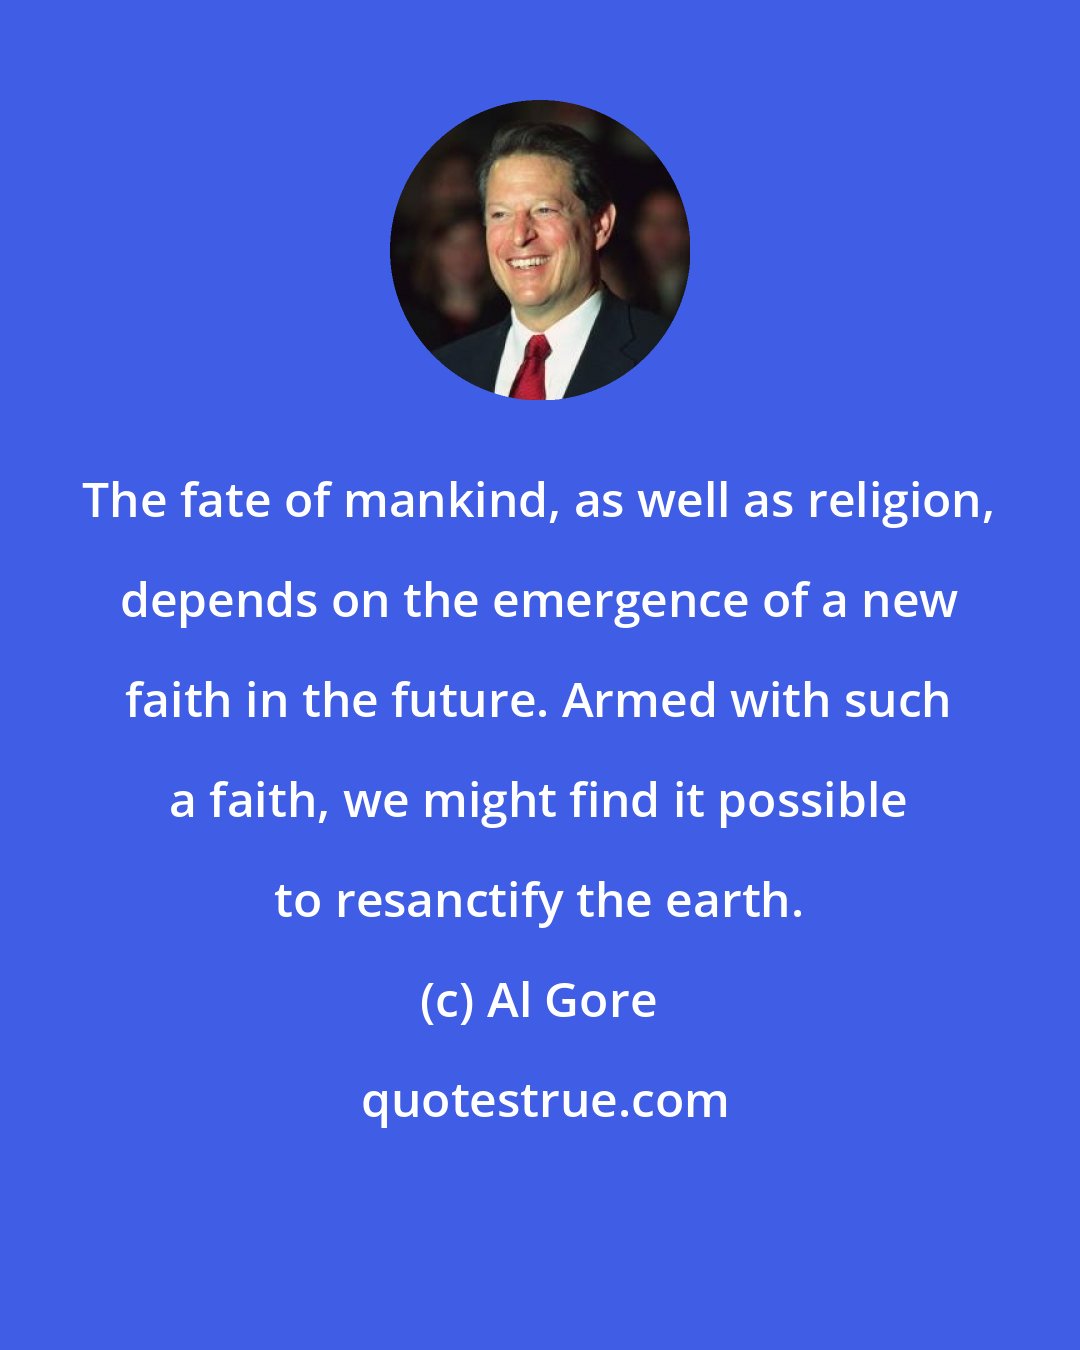 Al Gore: The fate of mankind, as well as religion, depends on the emergence of a new faith in the future. Armed with such a faith, we might find it possible to resanctify the earth.